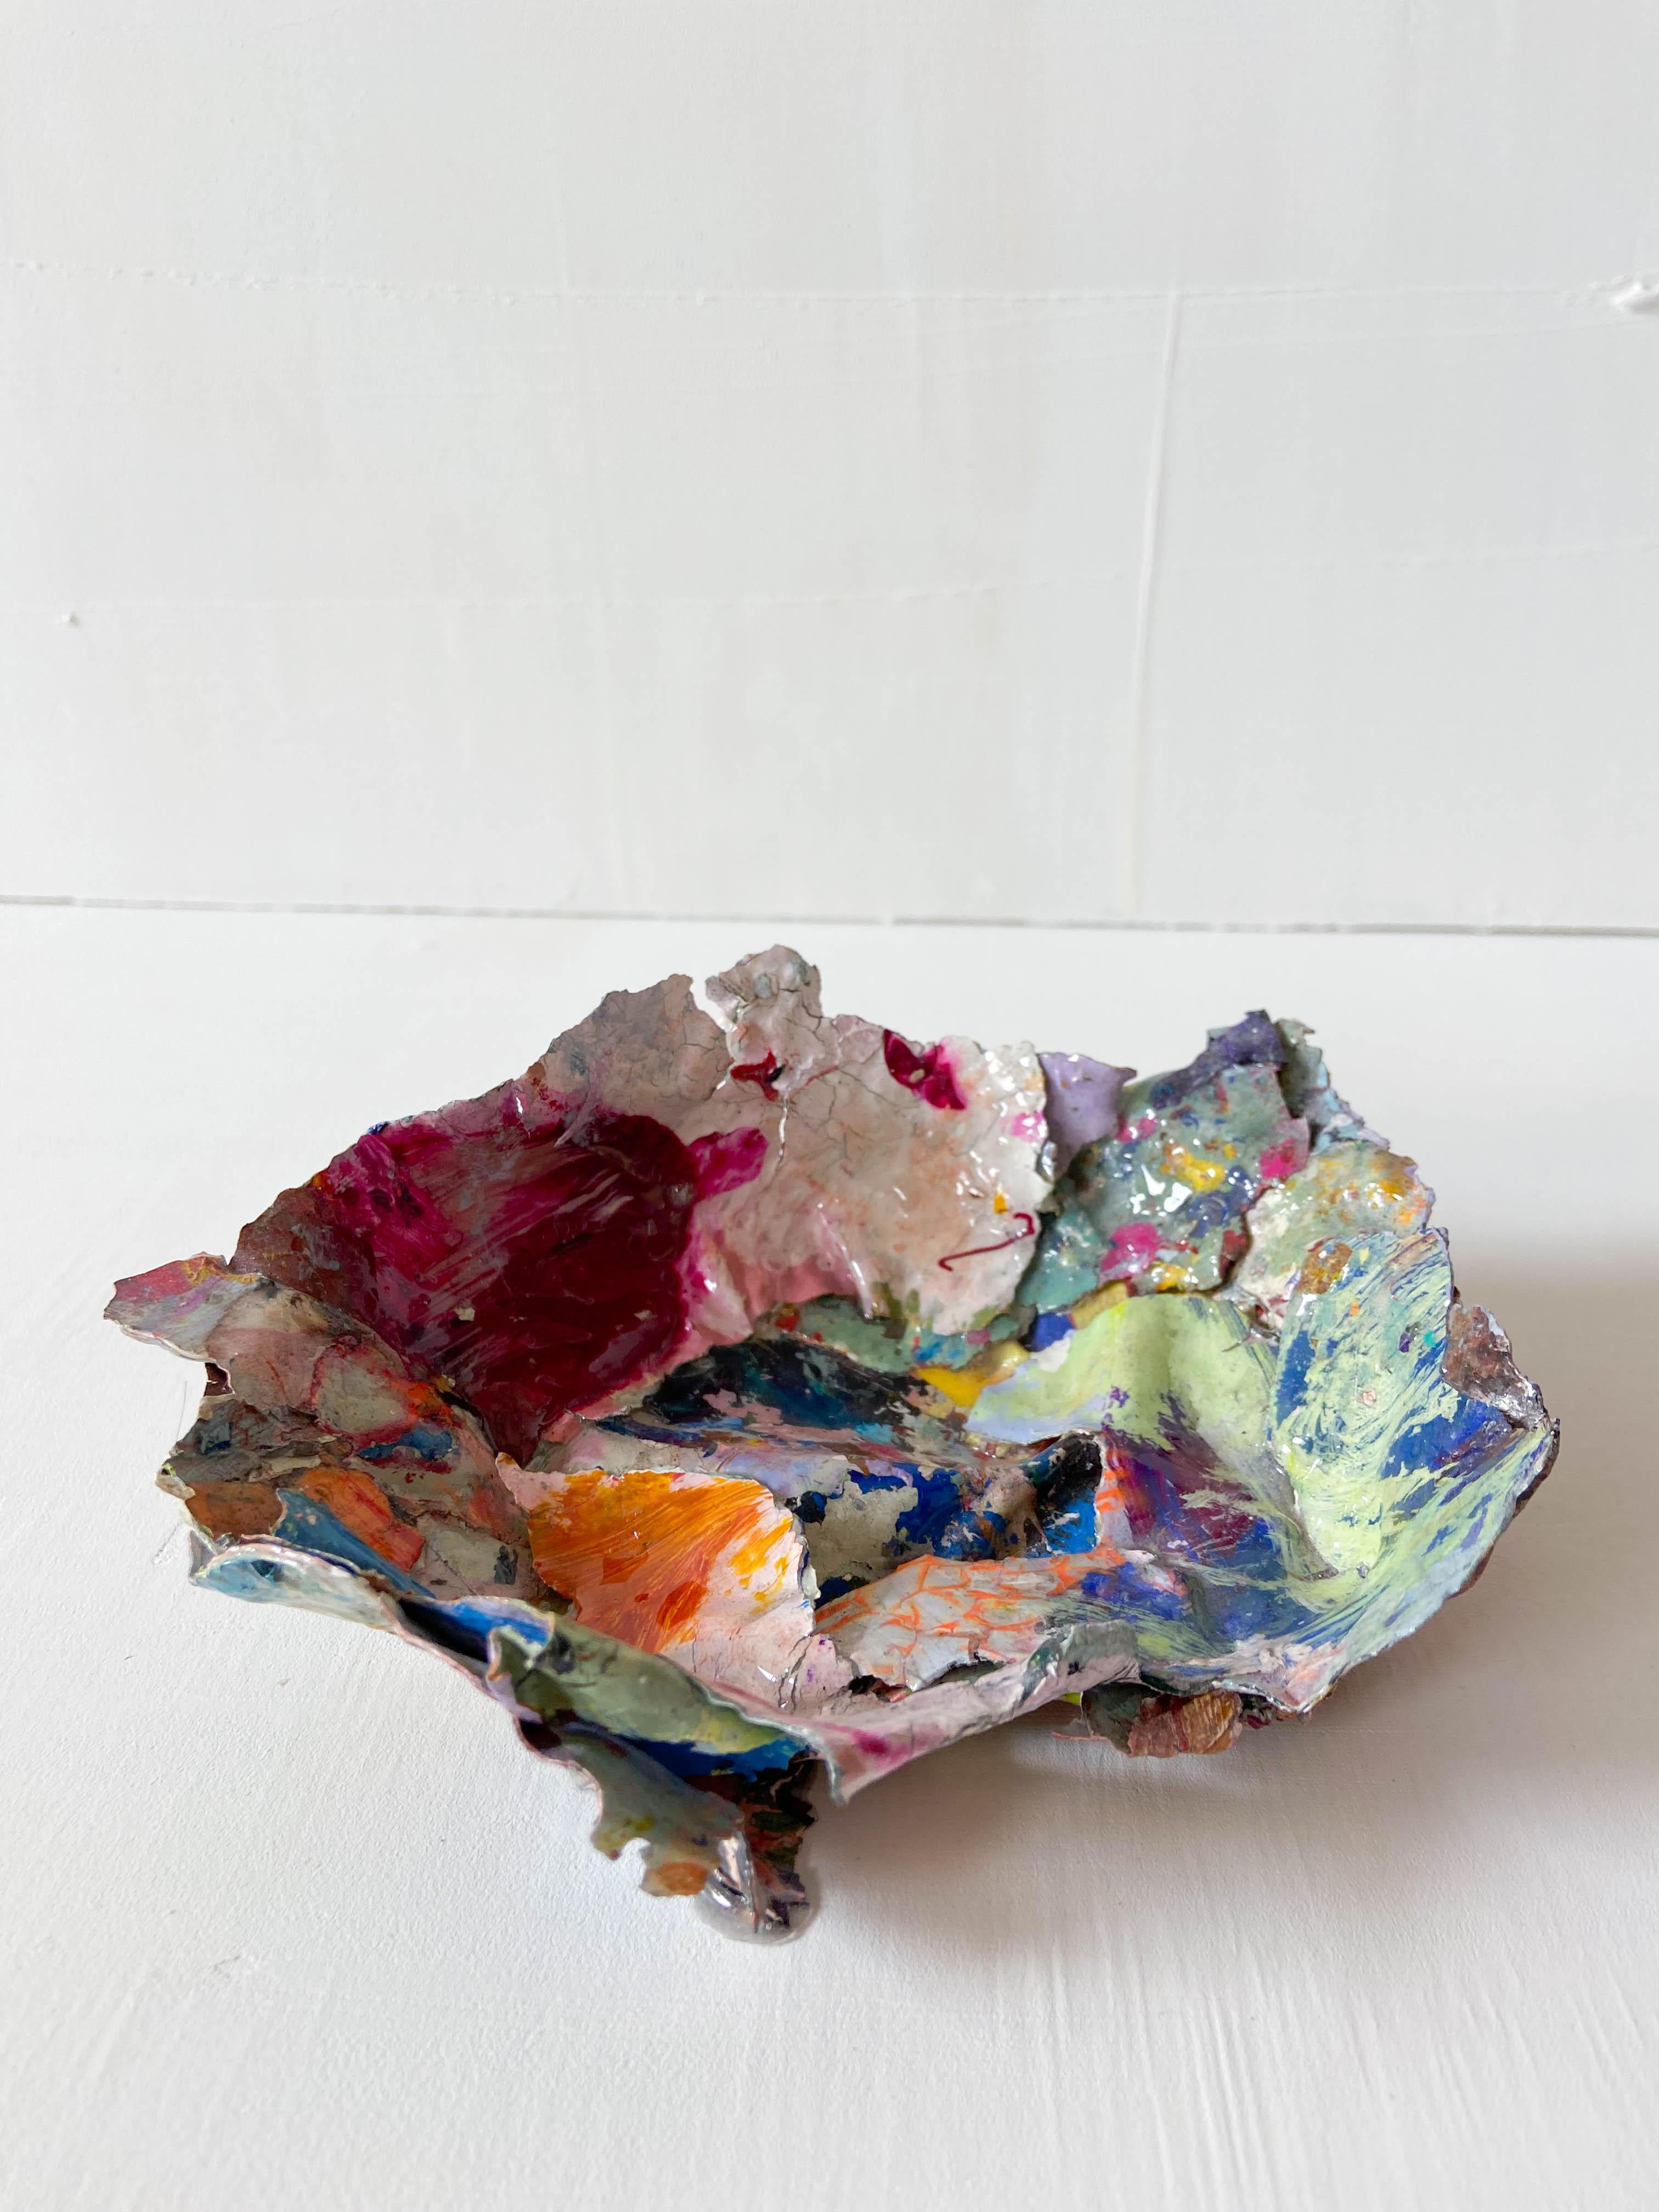 Catie Radney Abstract Sculpture - Small Residual Worlds Bowl Sculpture